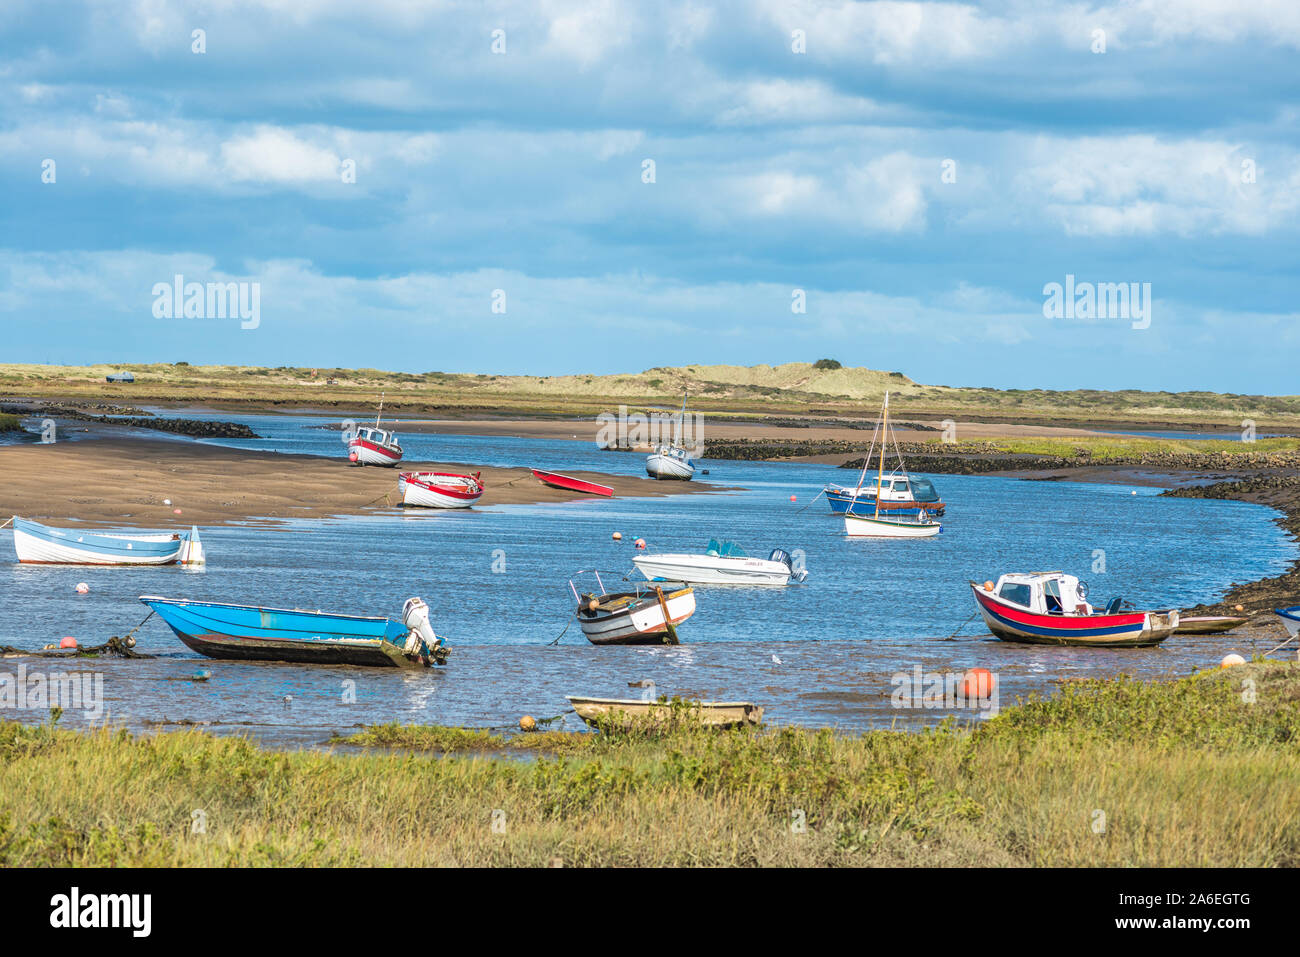 Colourful boats on river Burn estuary at high tide, seen from Norfolk Coast path National Trail near Burnham Overy Staithe, East Anglia, England, UK. Stock Photo